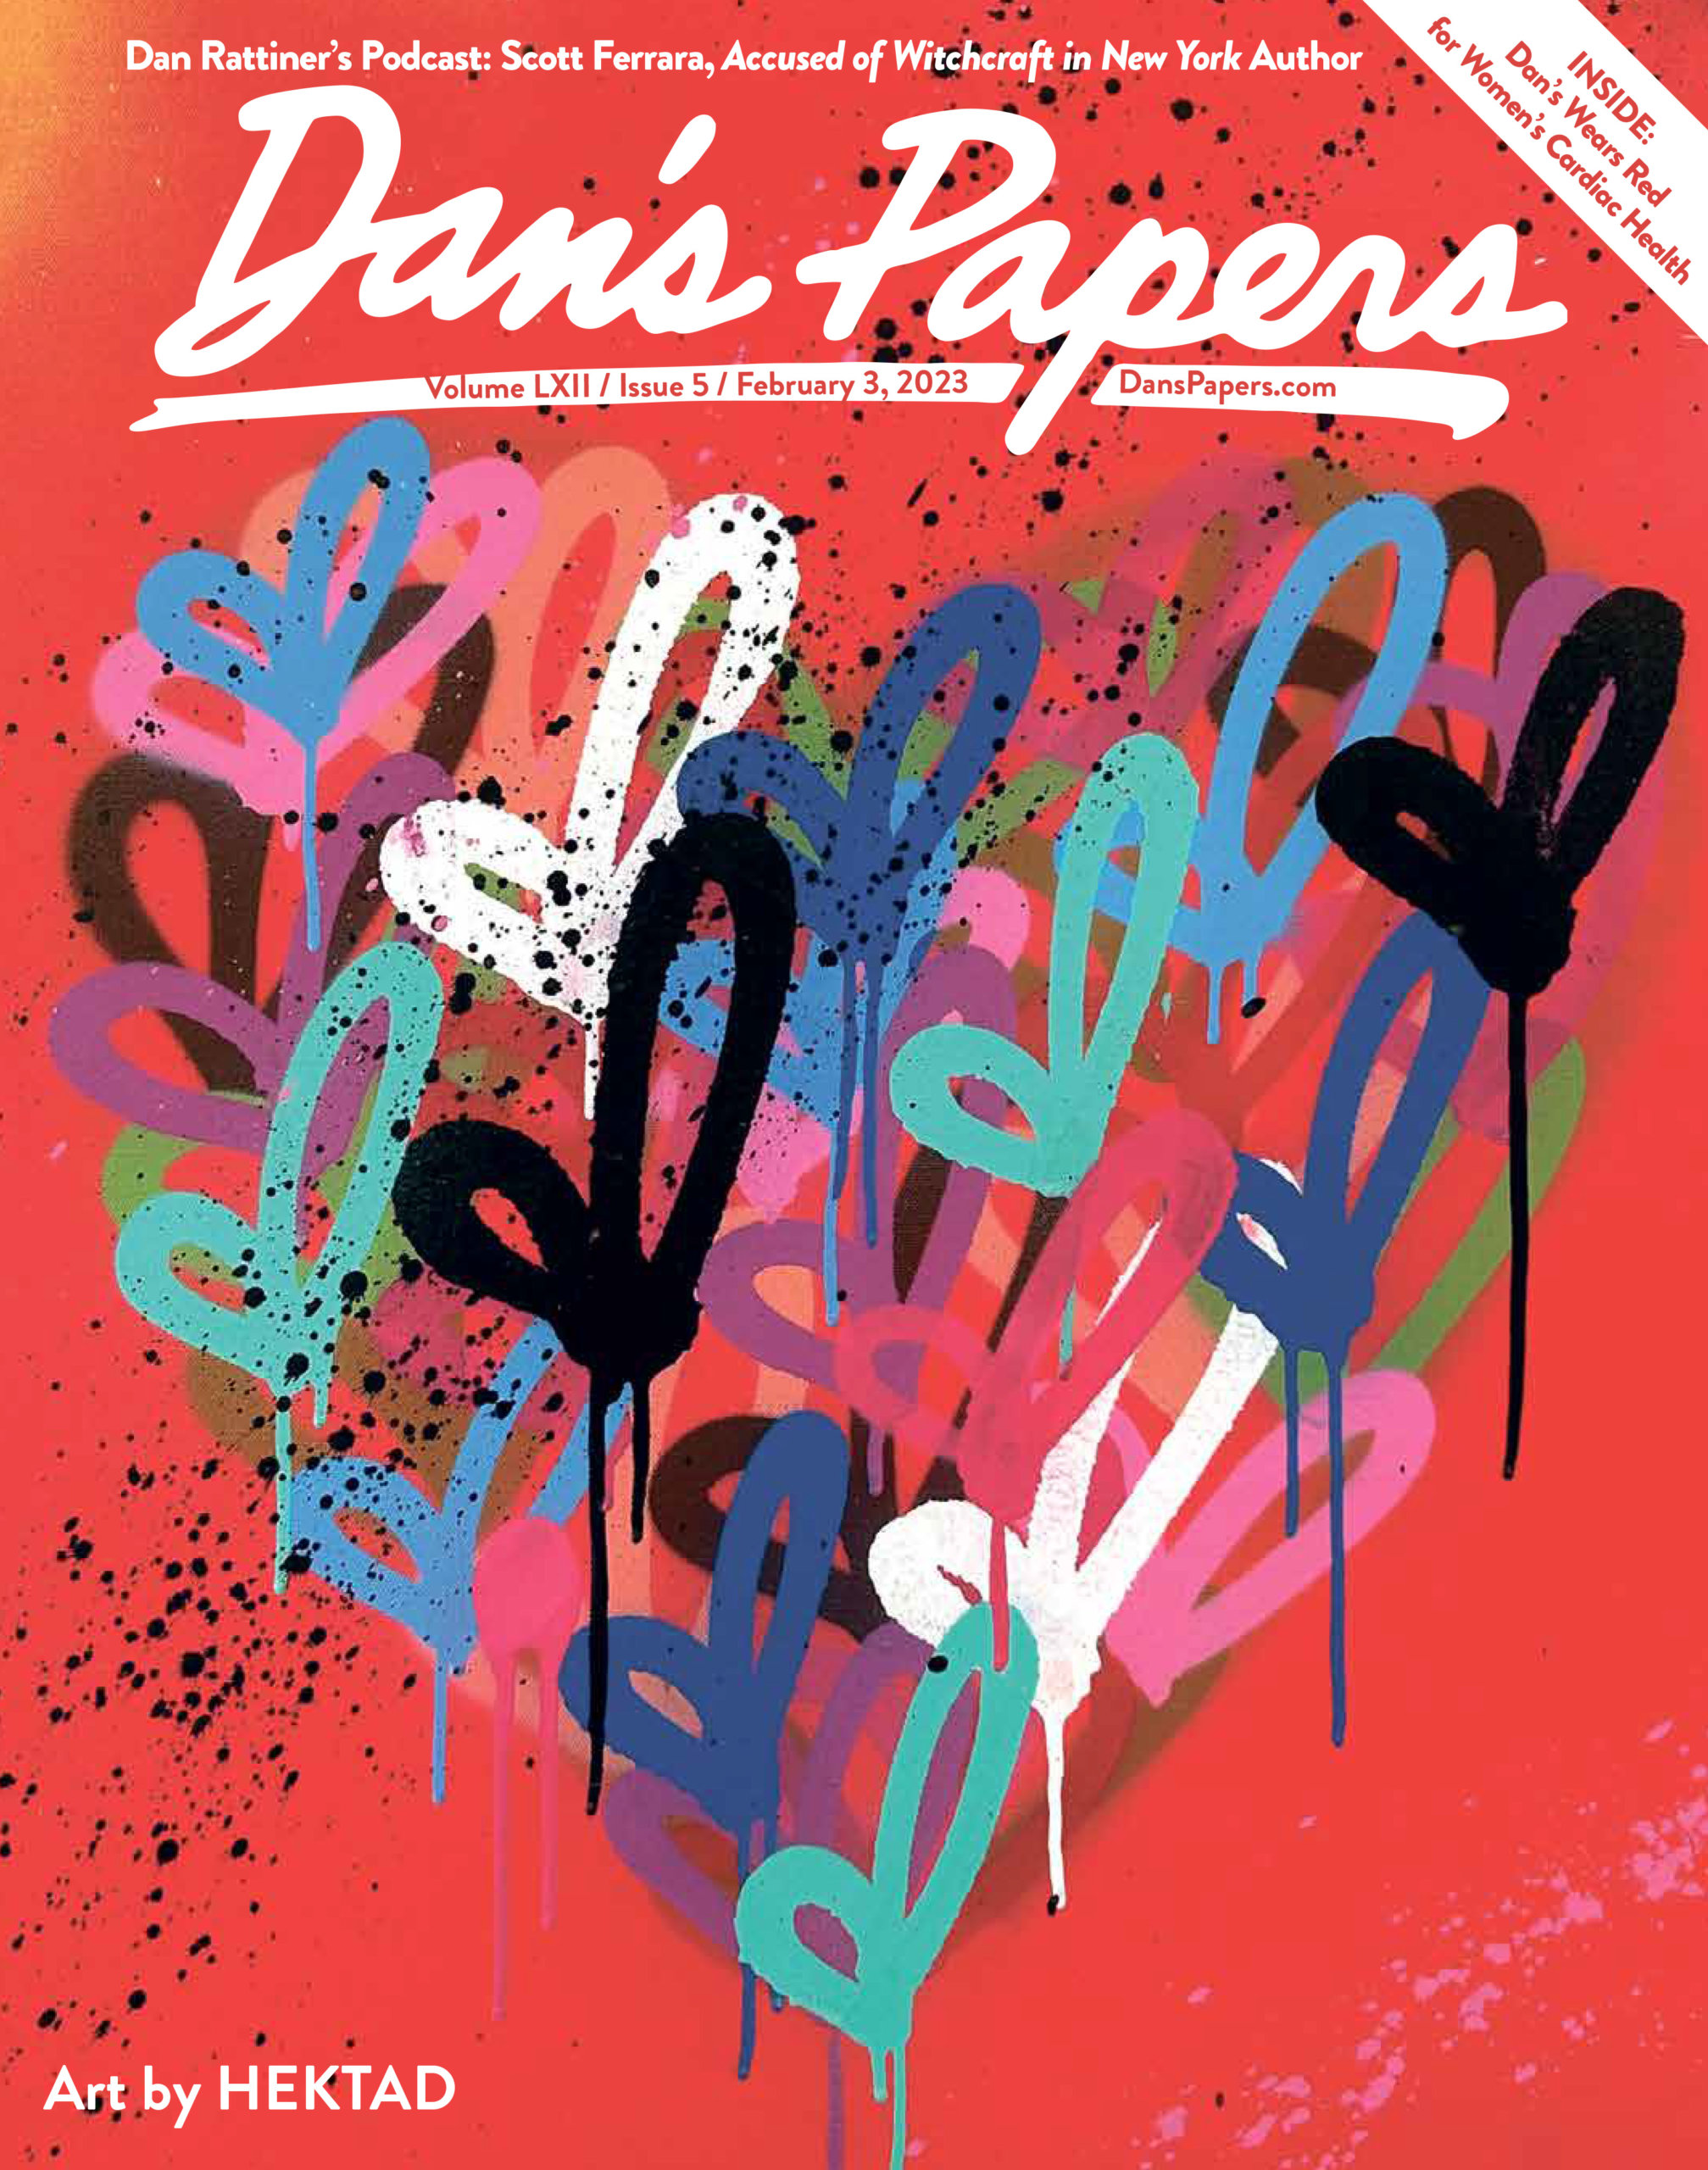 February 3, 2023 Dan's Papers cover art by HEKTAD